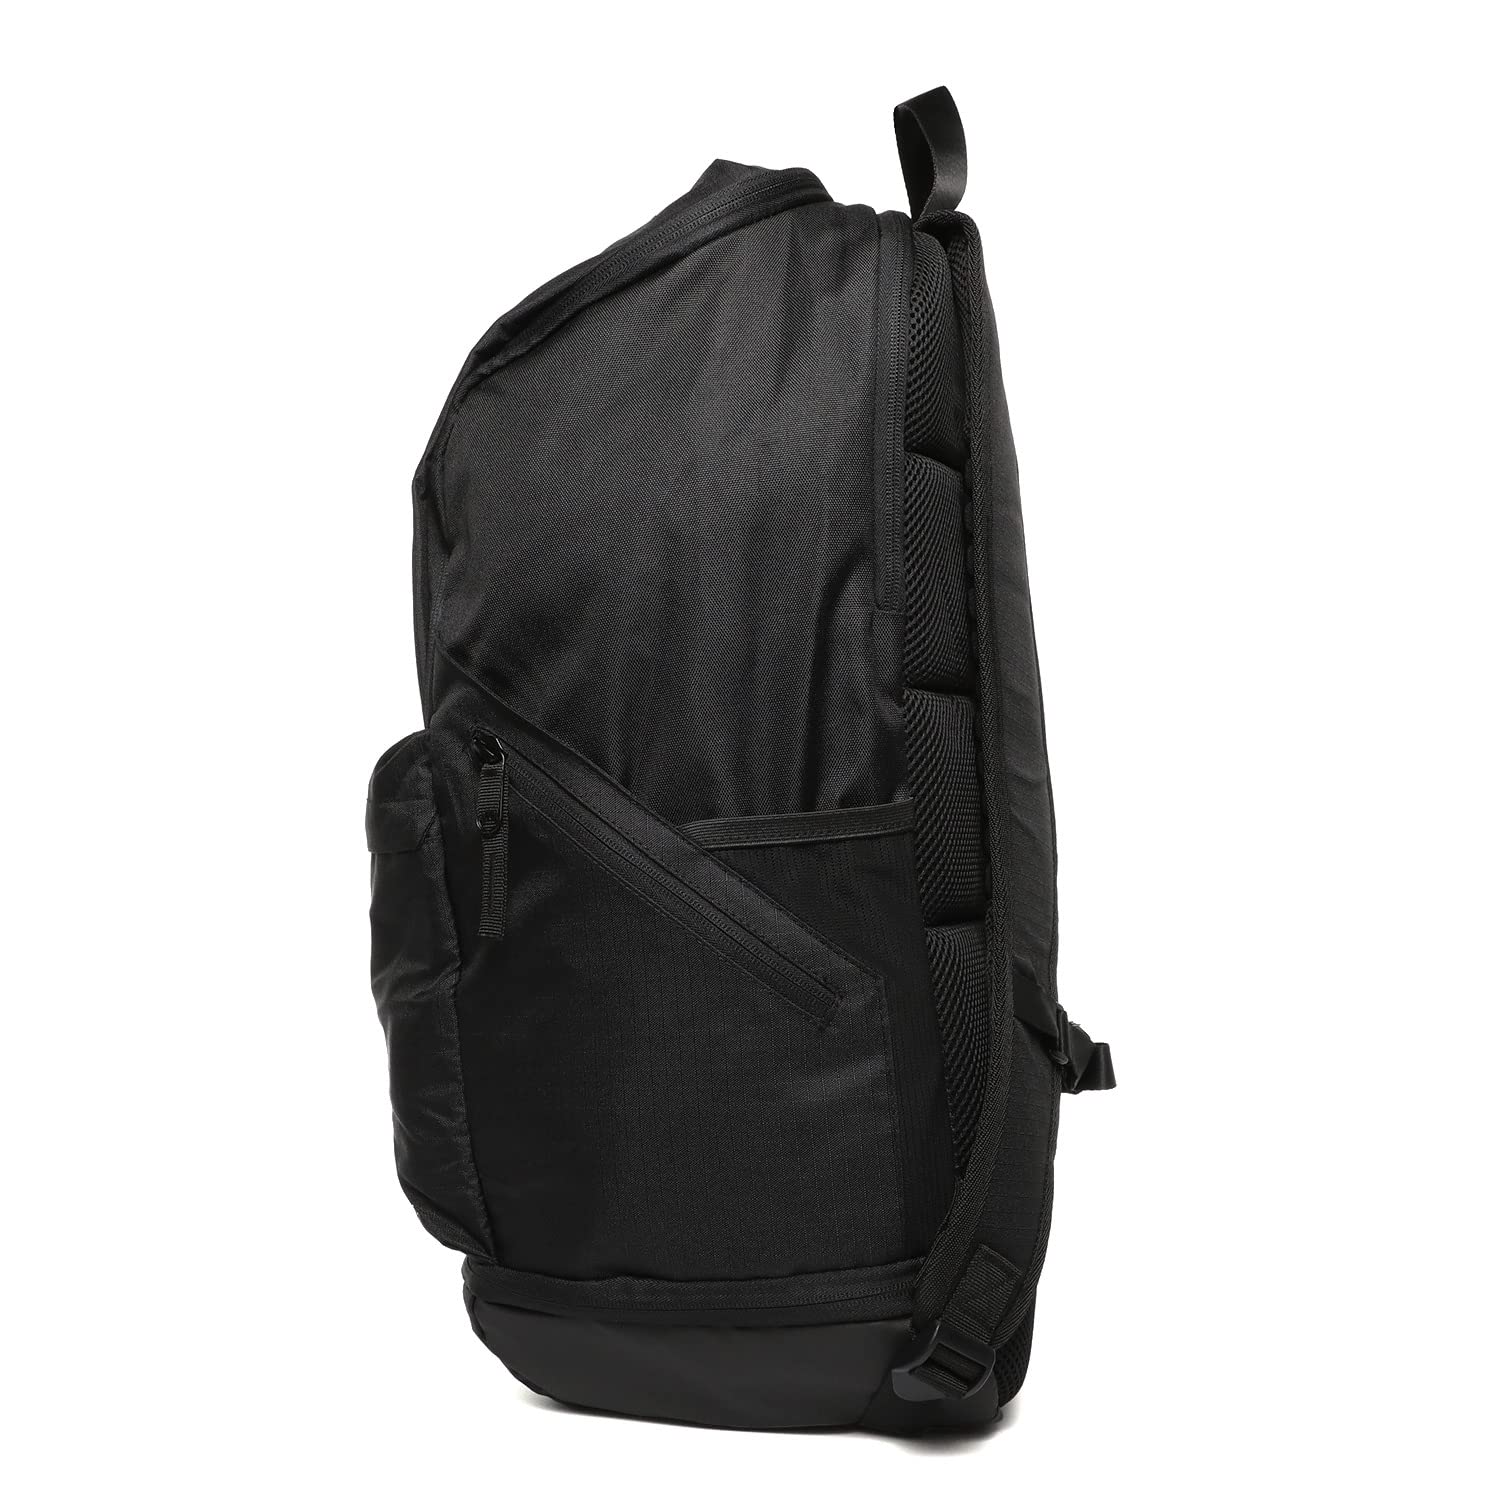 Image 4 of Zion Velocity Backpack (Big Kid)